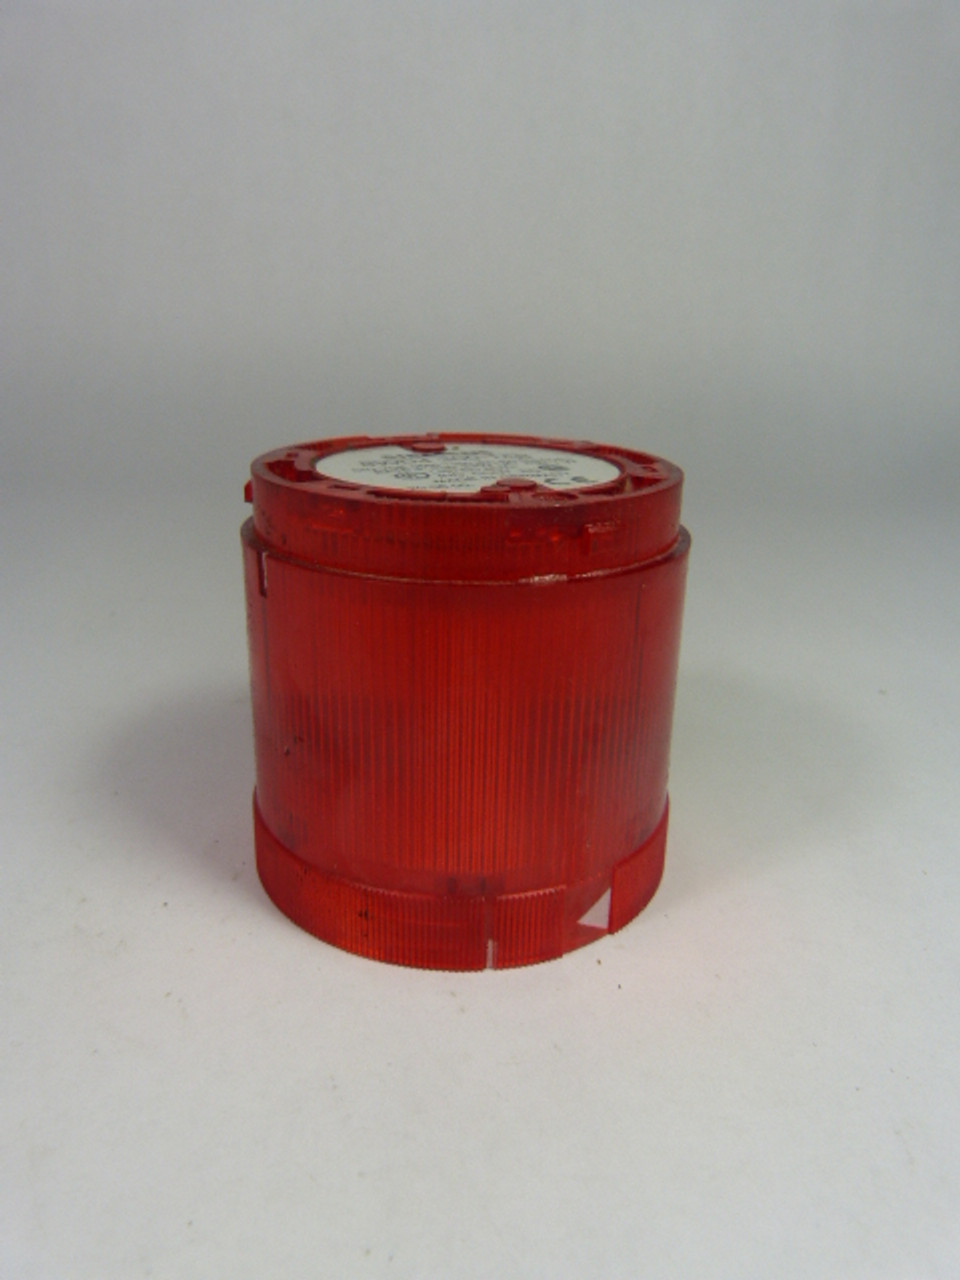 Siemens 8WD4-300-1AB Stack Light Red USED